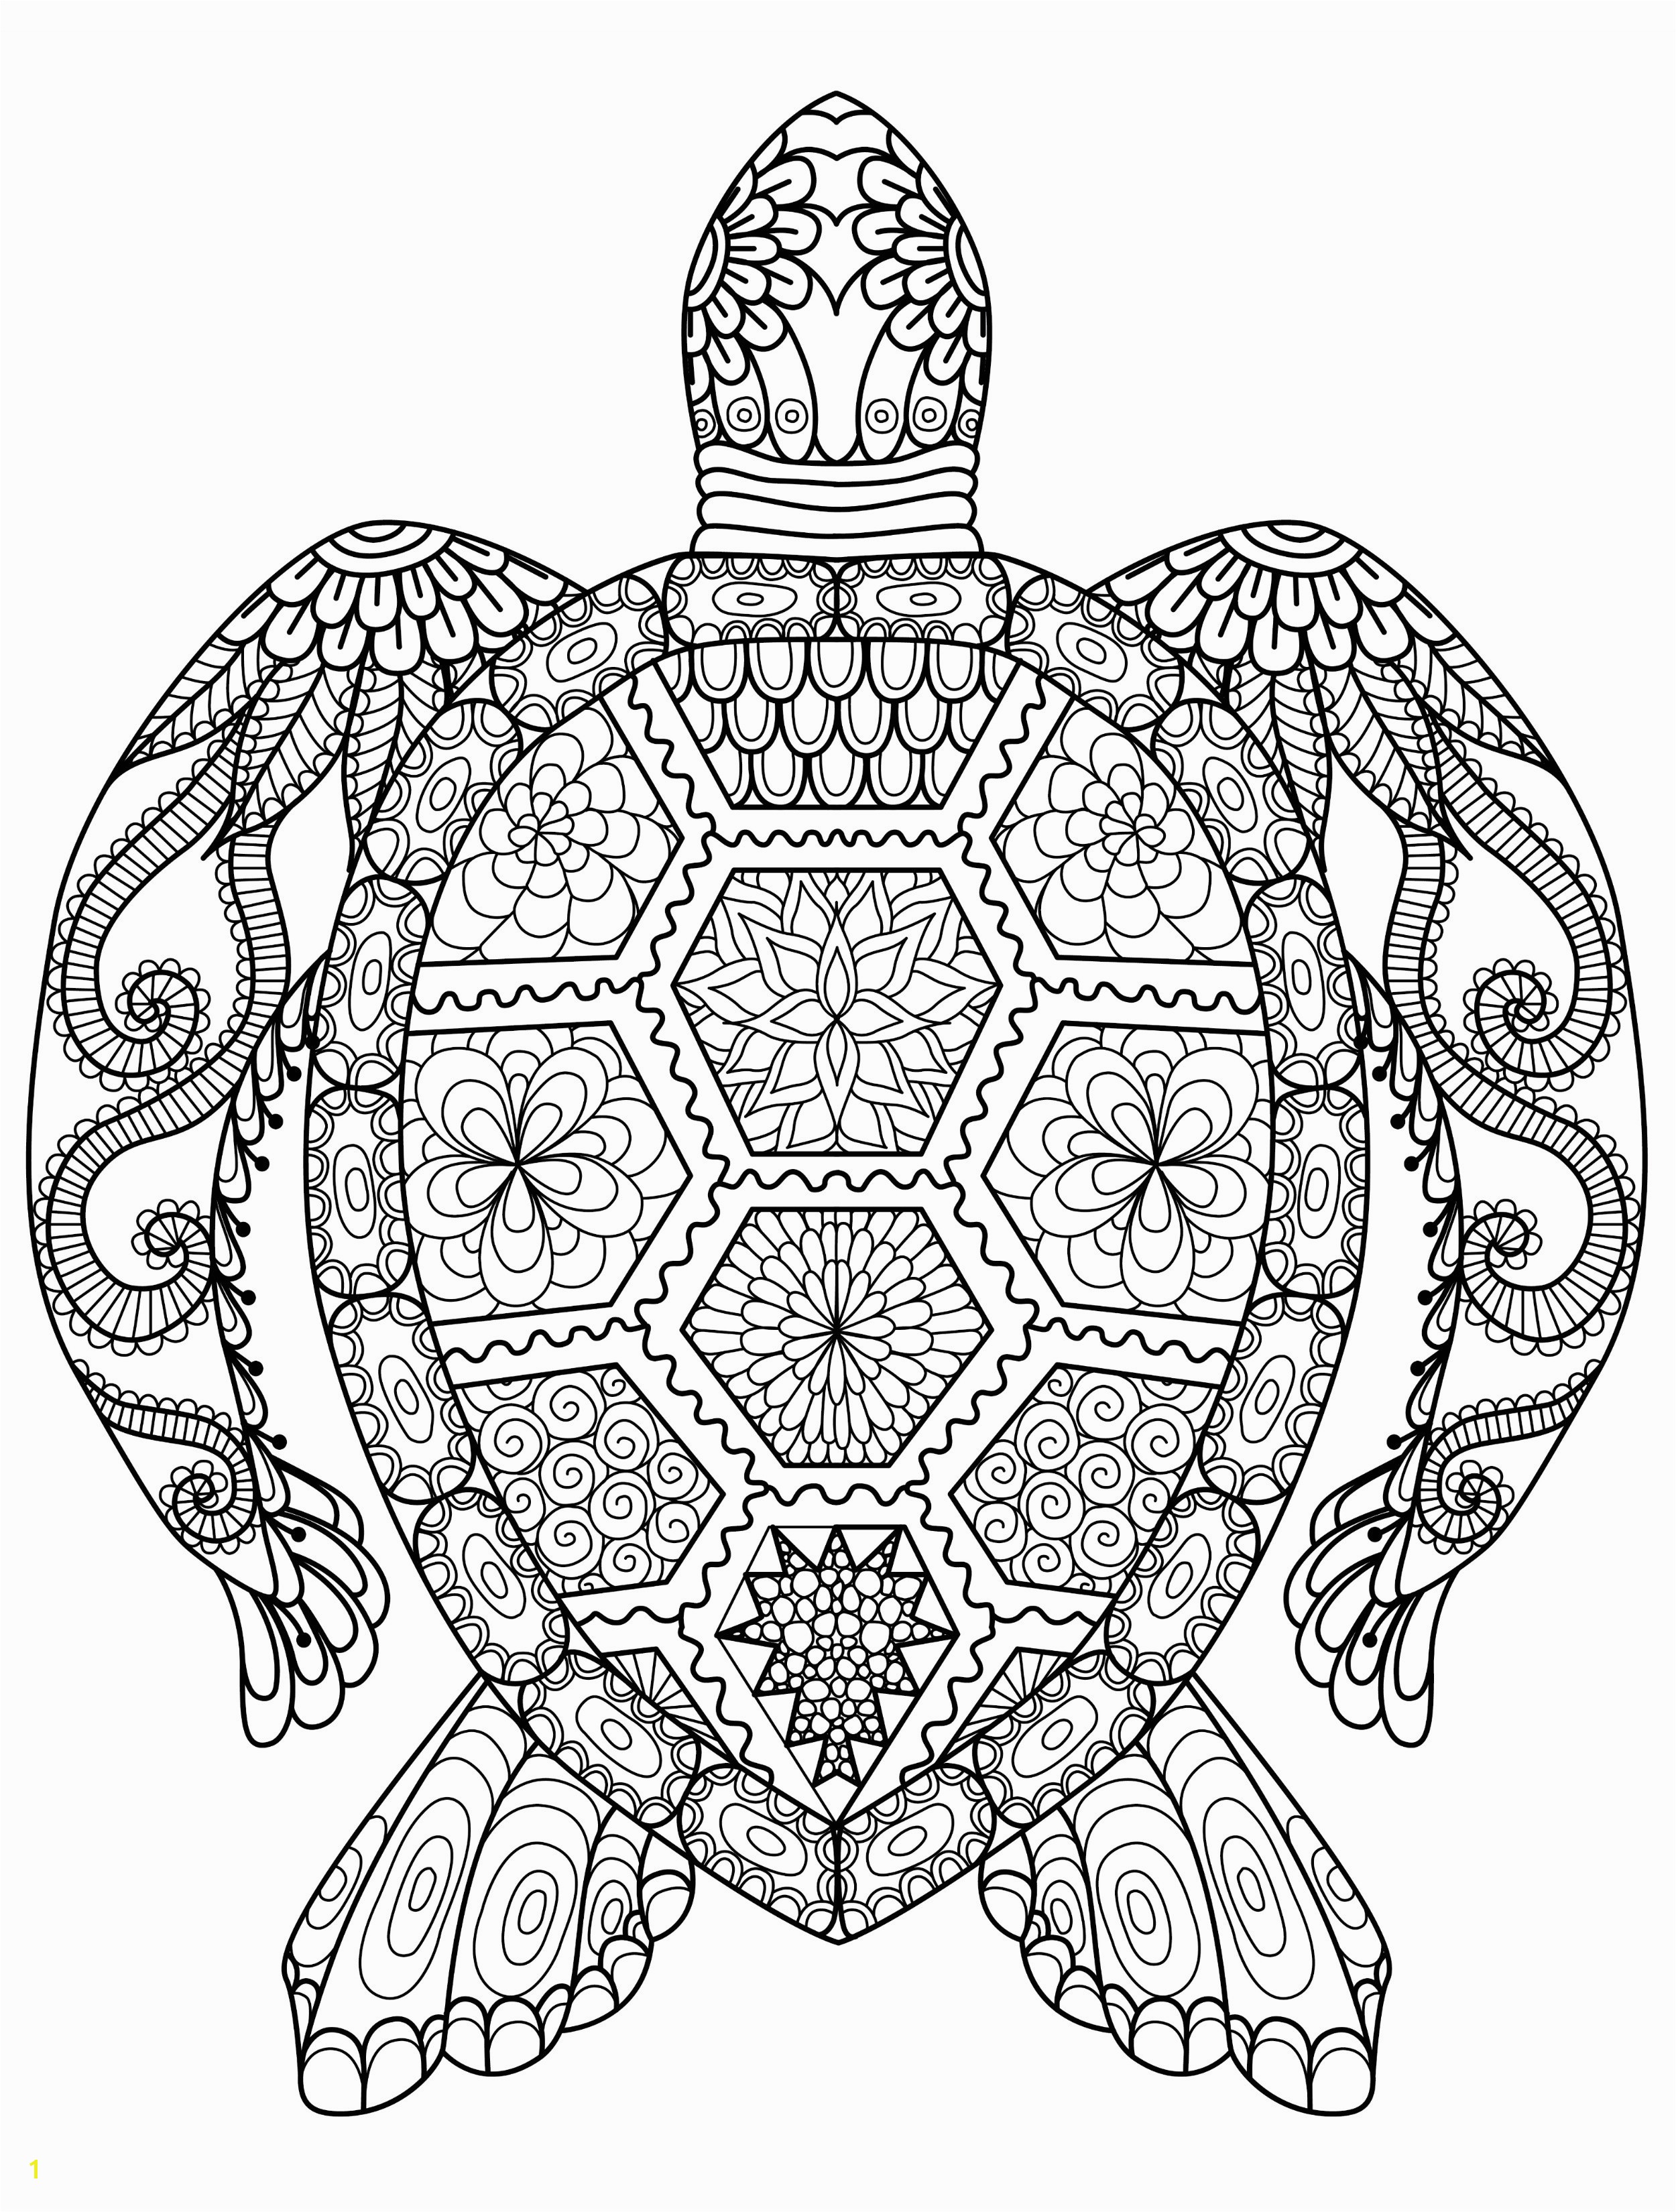 Animal Coloring Pages For Adults Printable Coloring Pages For free printable coloring pages